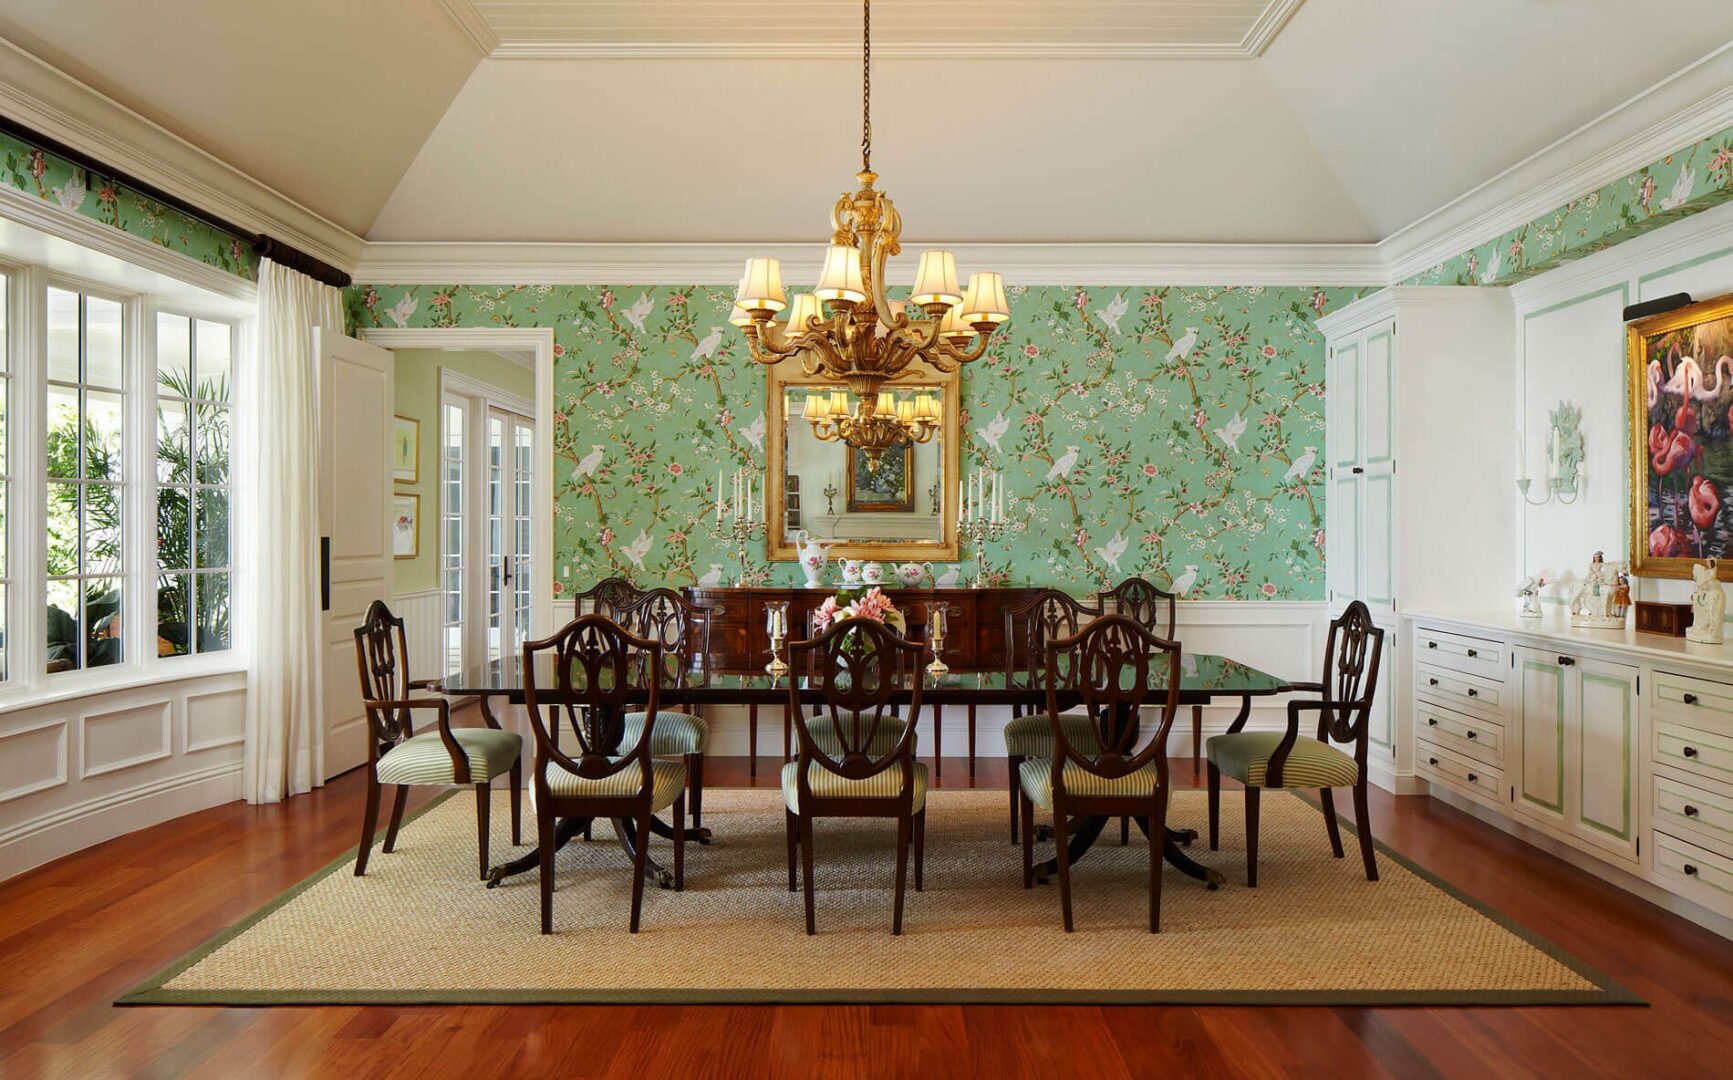 A large dining room table with chairs and a chandelier.